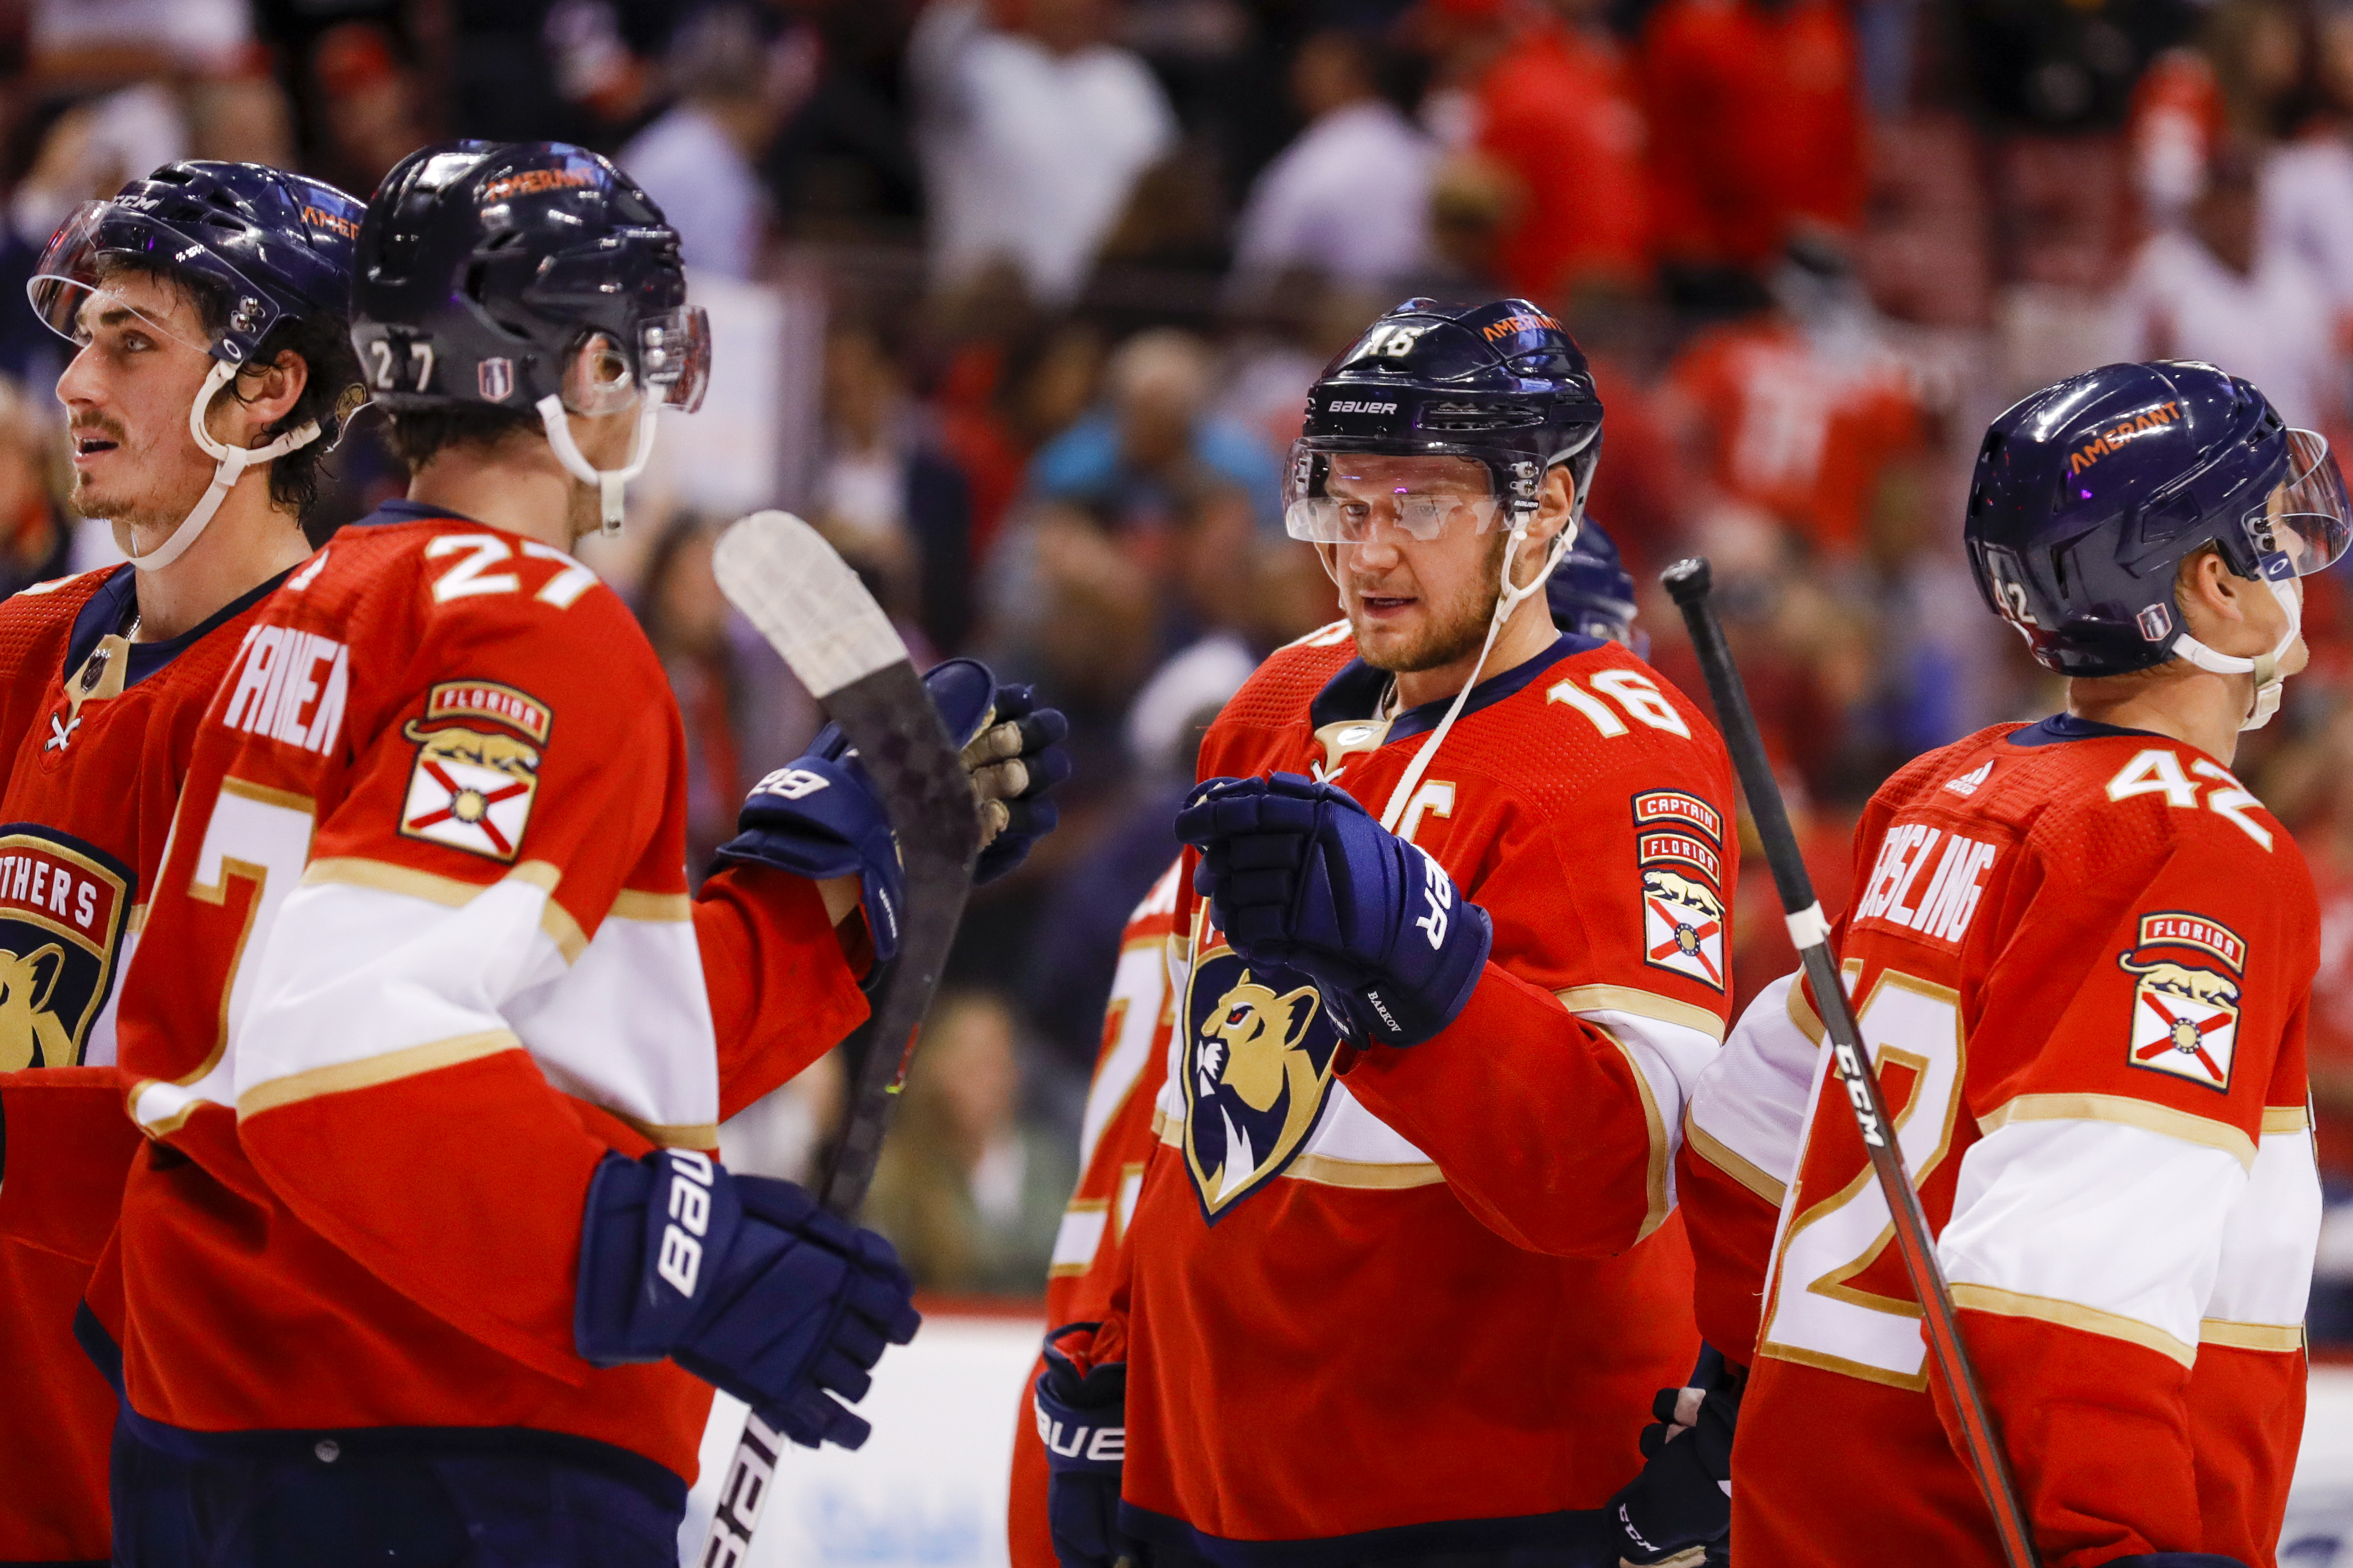 Florida Panthers center Aleksander Barkov (16) celebrates with center Eetu Luostarinen (27) after winning against the Washington Capitals in Game 2 of the first round of the 2022 Stanley Cup Playoffs at FLA Live Arena.